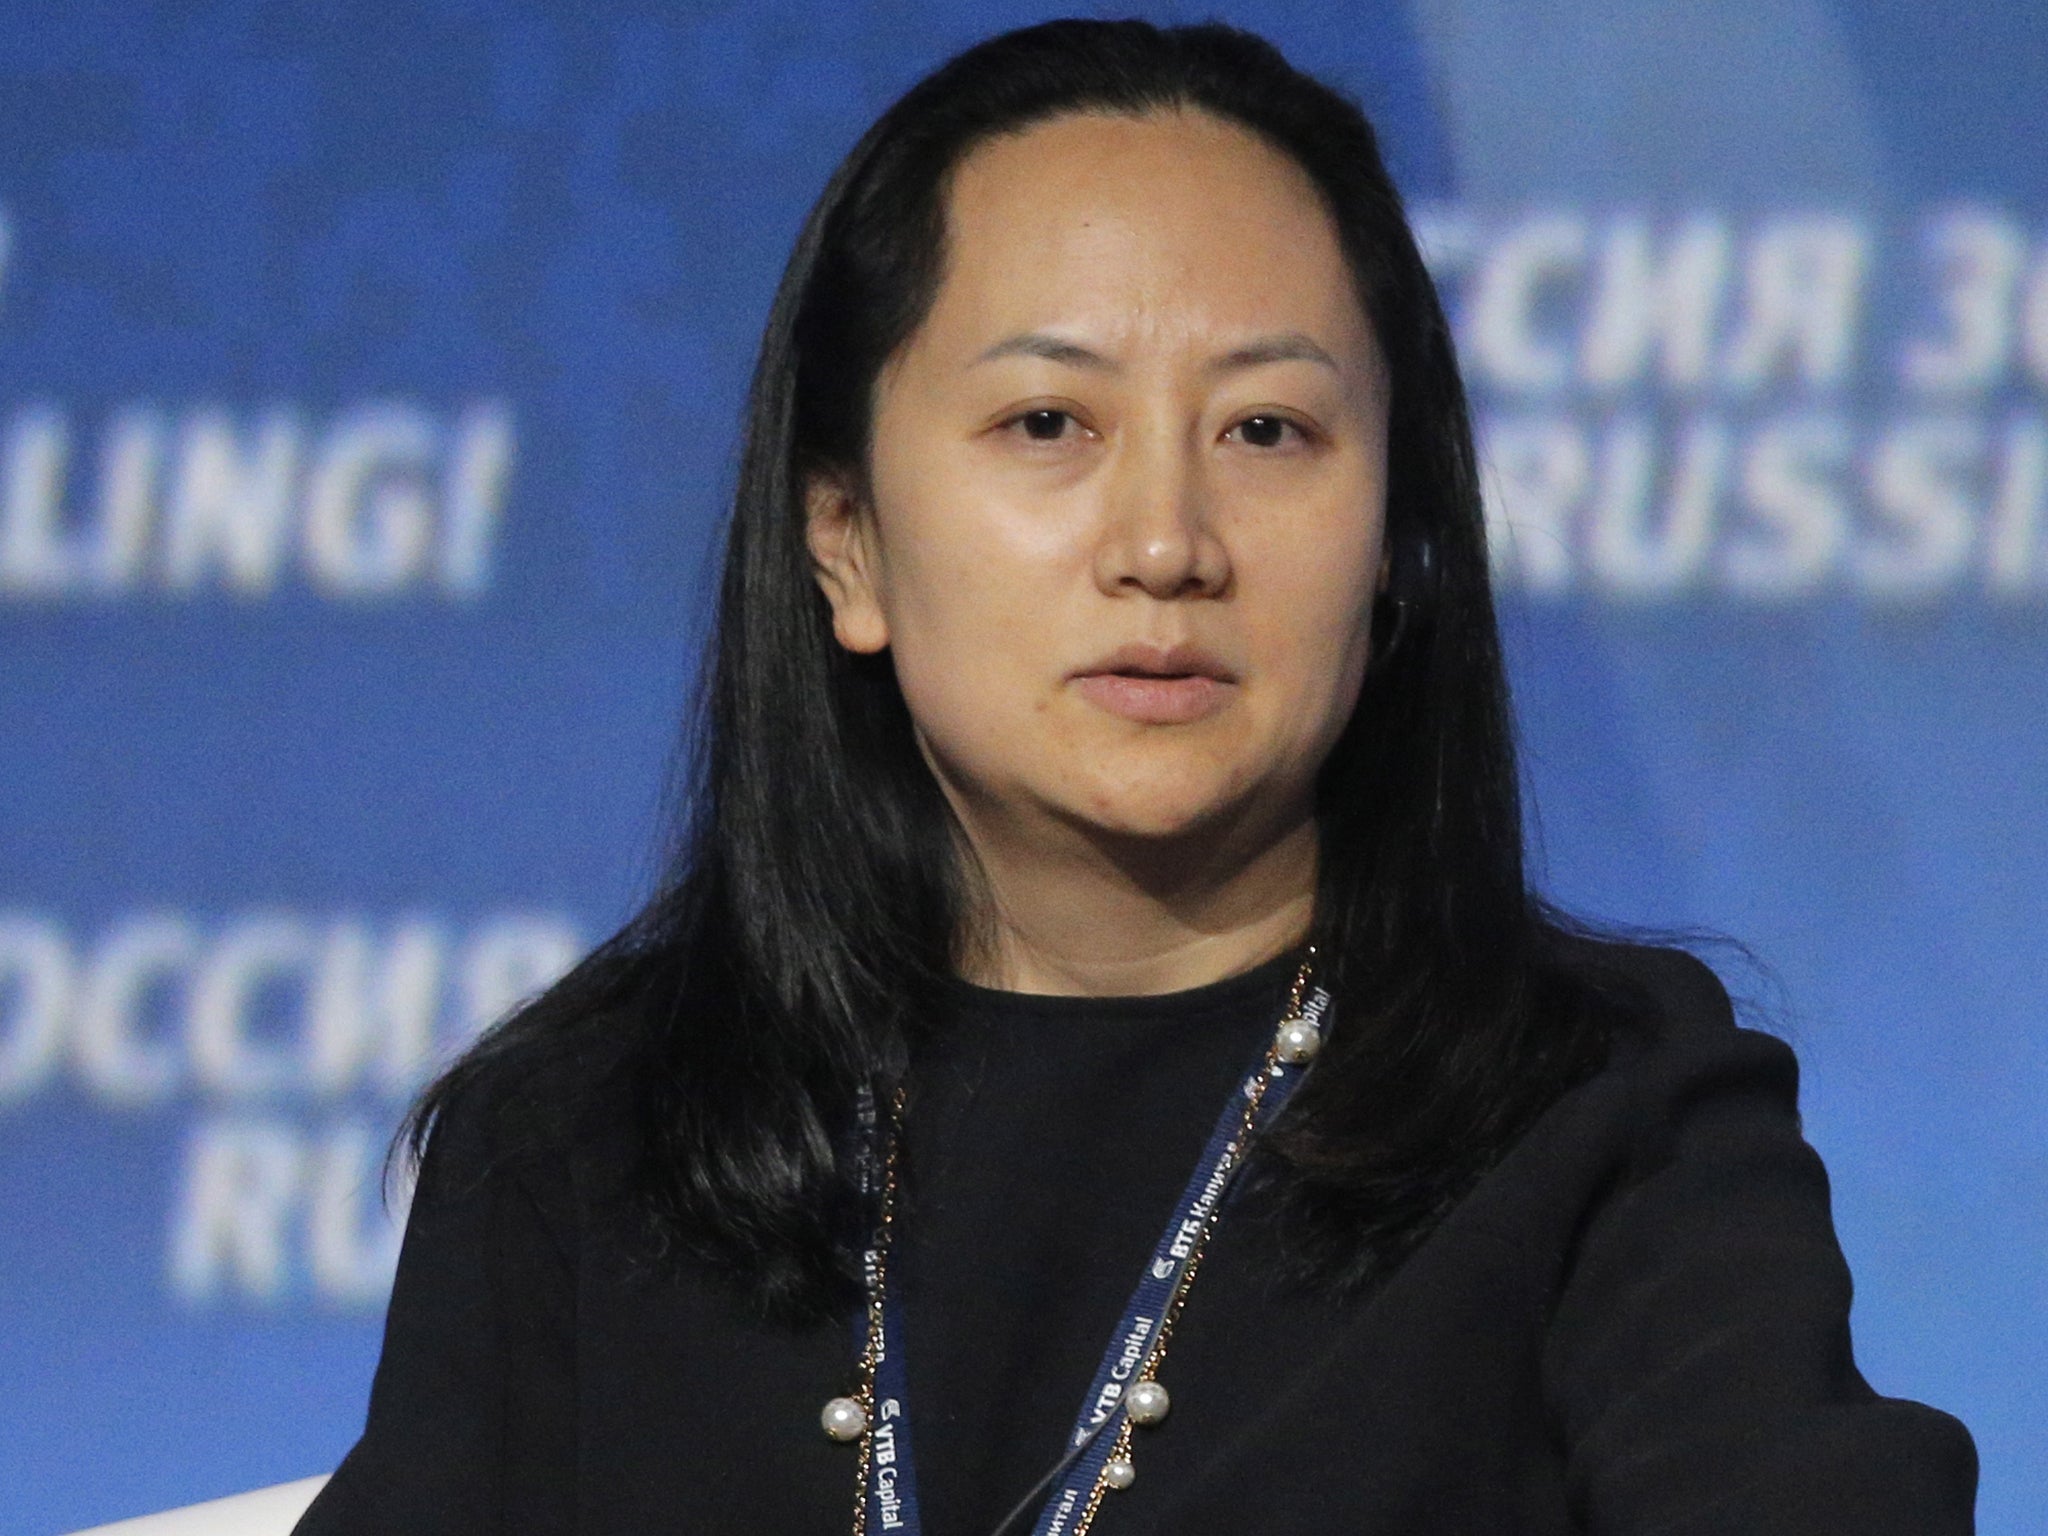 Meng Wanzhou is being sought for extradition by the US